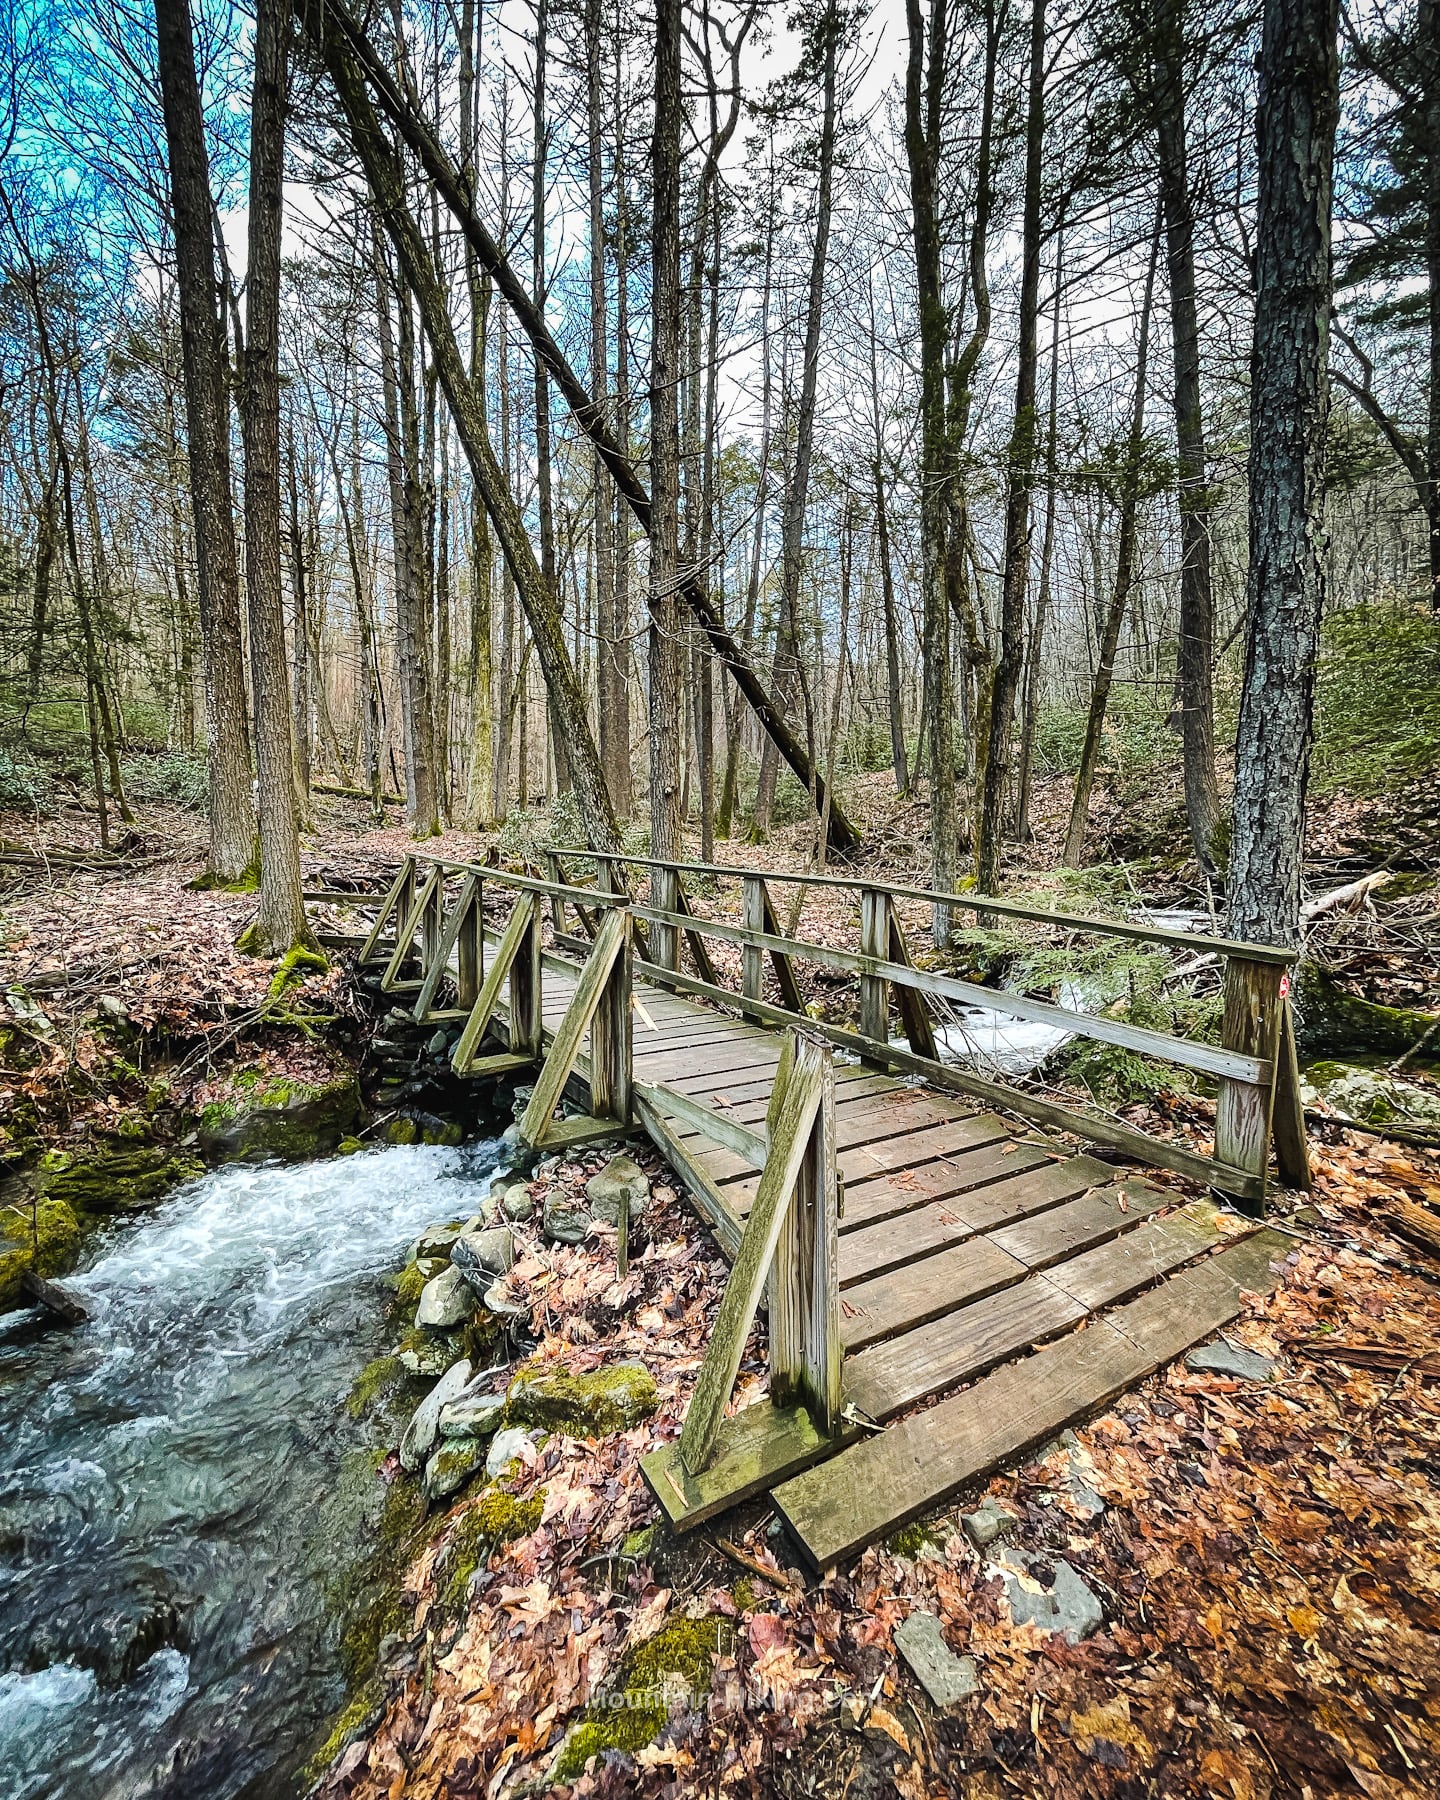 footbridge in the woods passing over a small brook